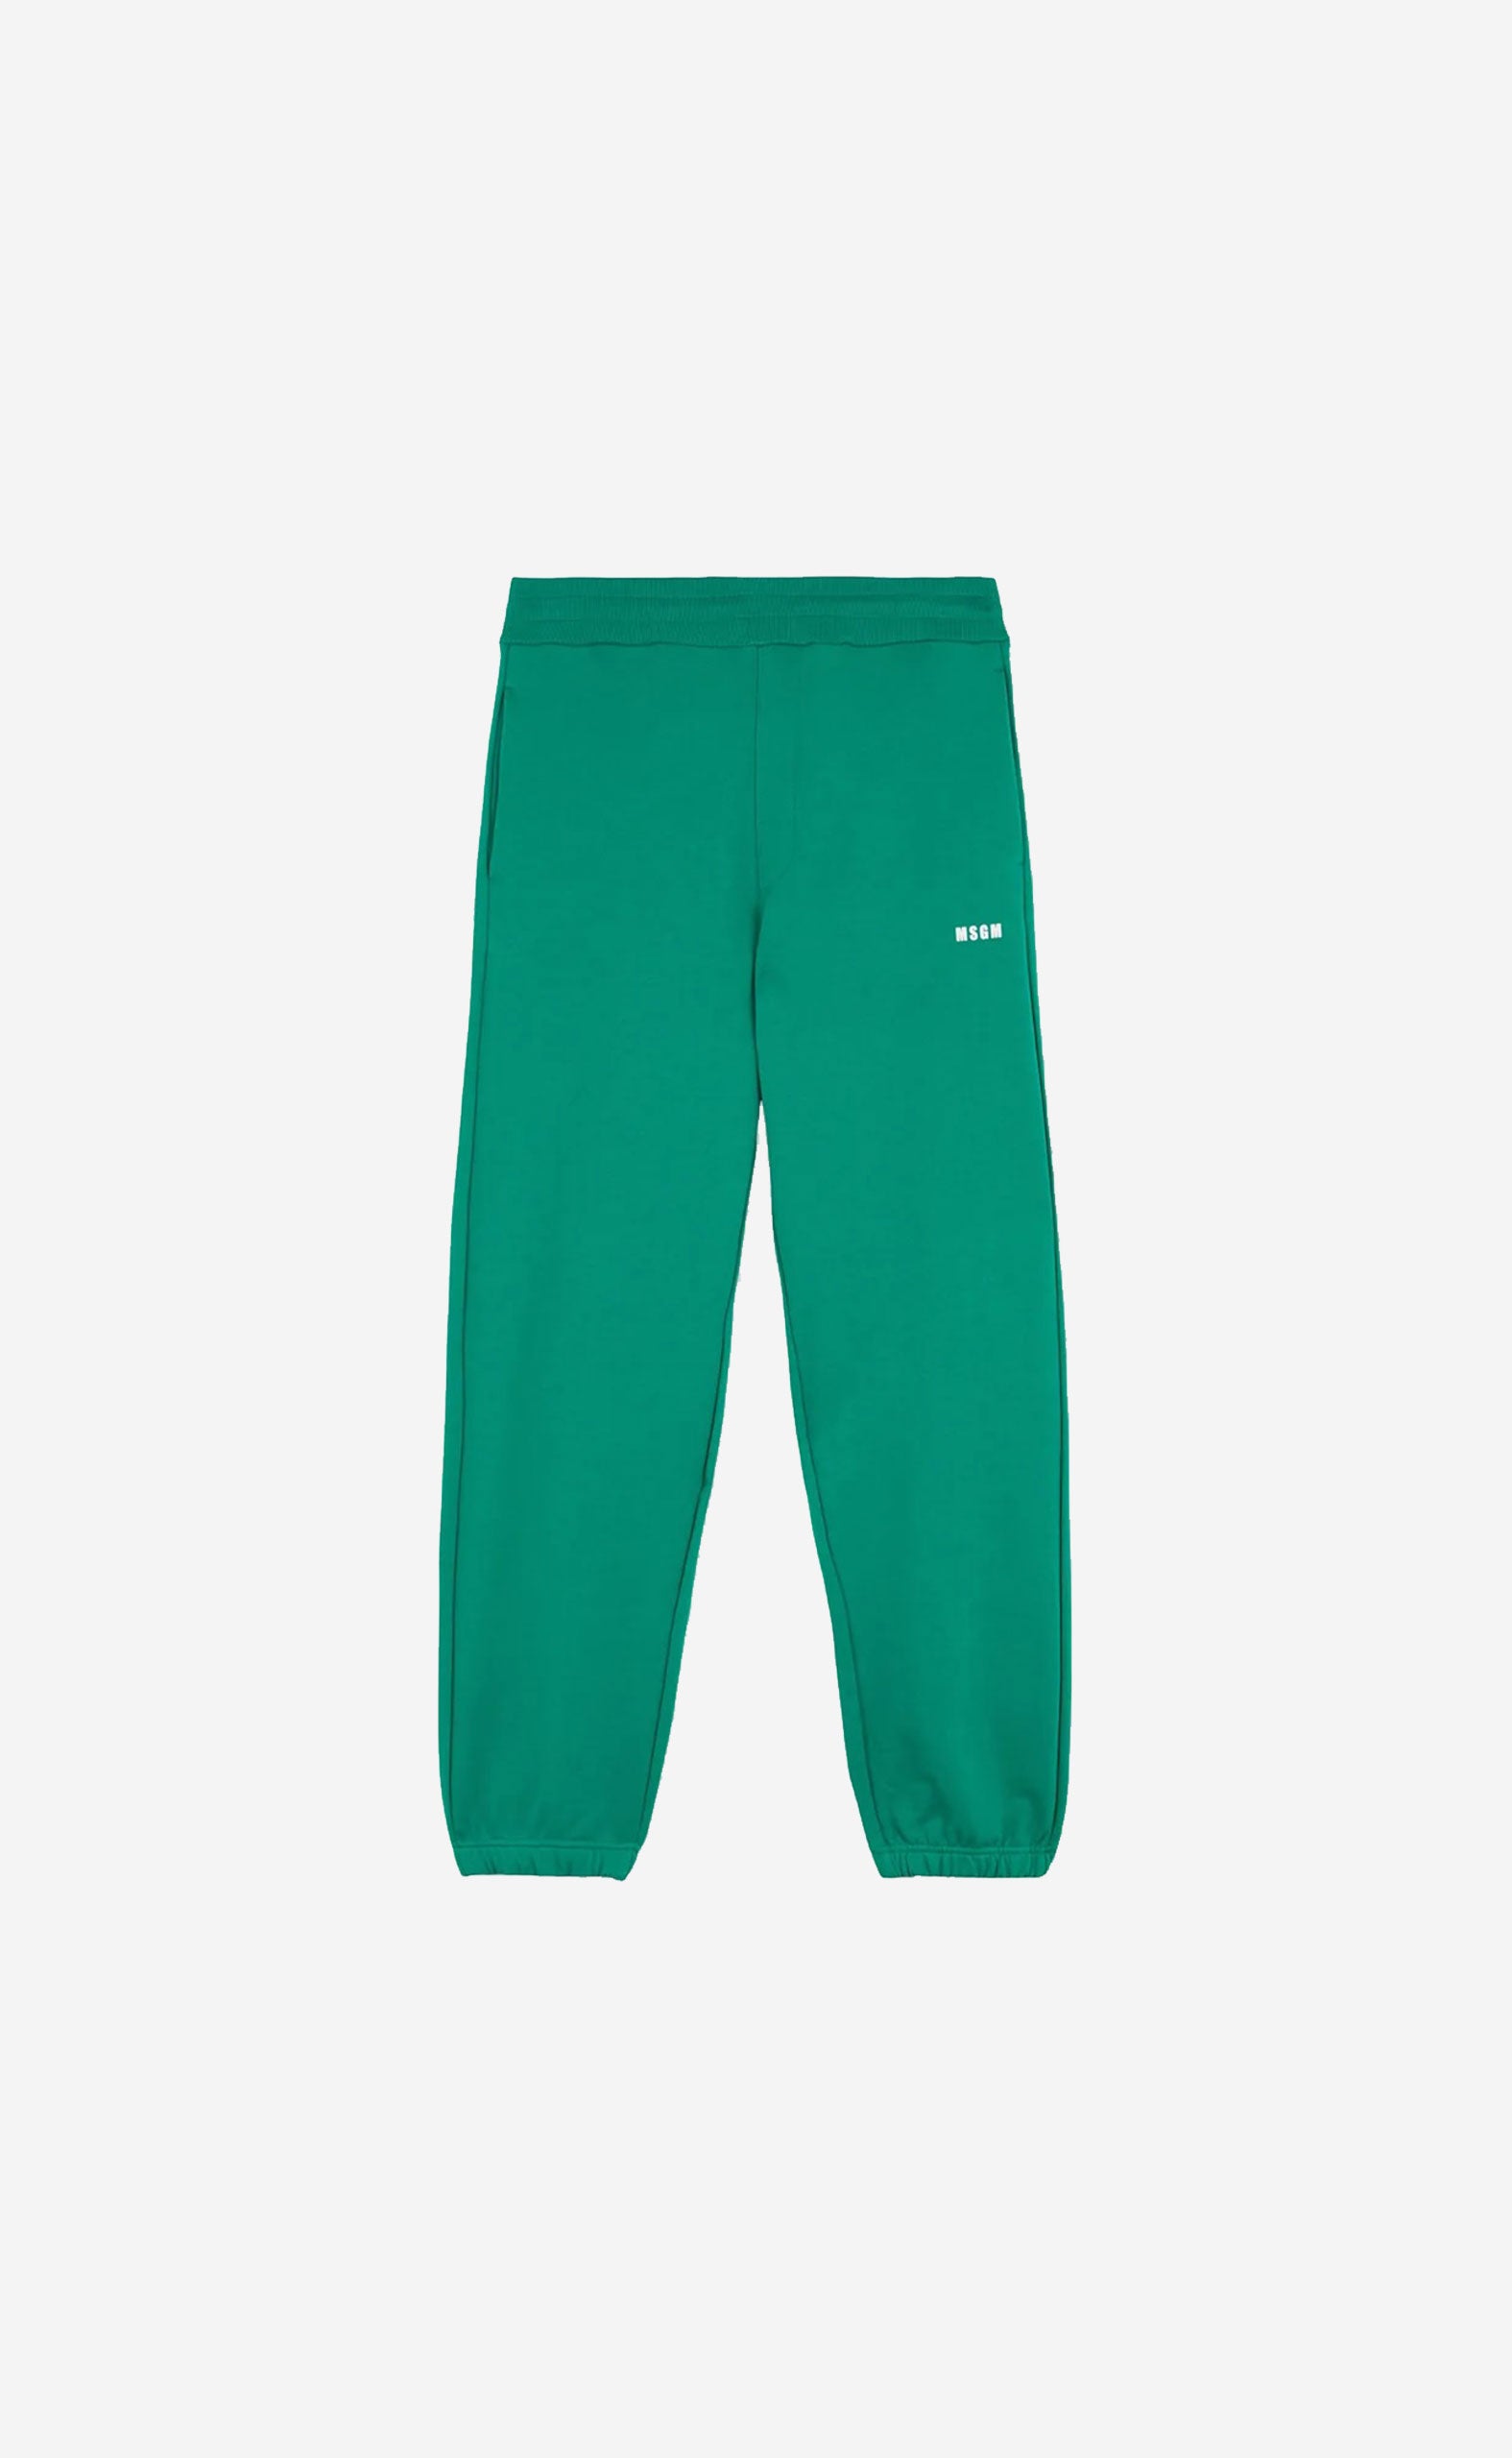 PEPPER GREEN COTTON TRACK PANTS WITH MICRO LOGO DETAIL